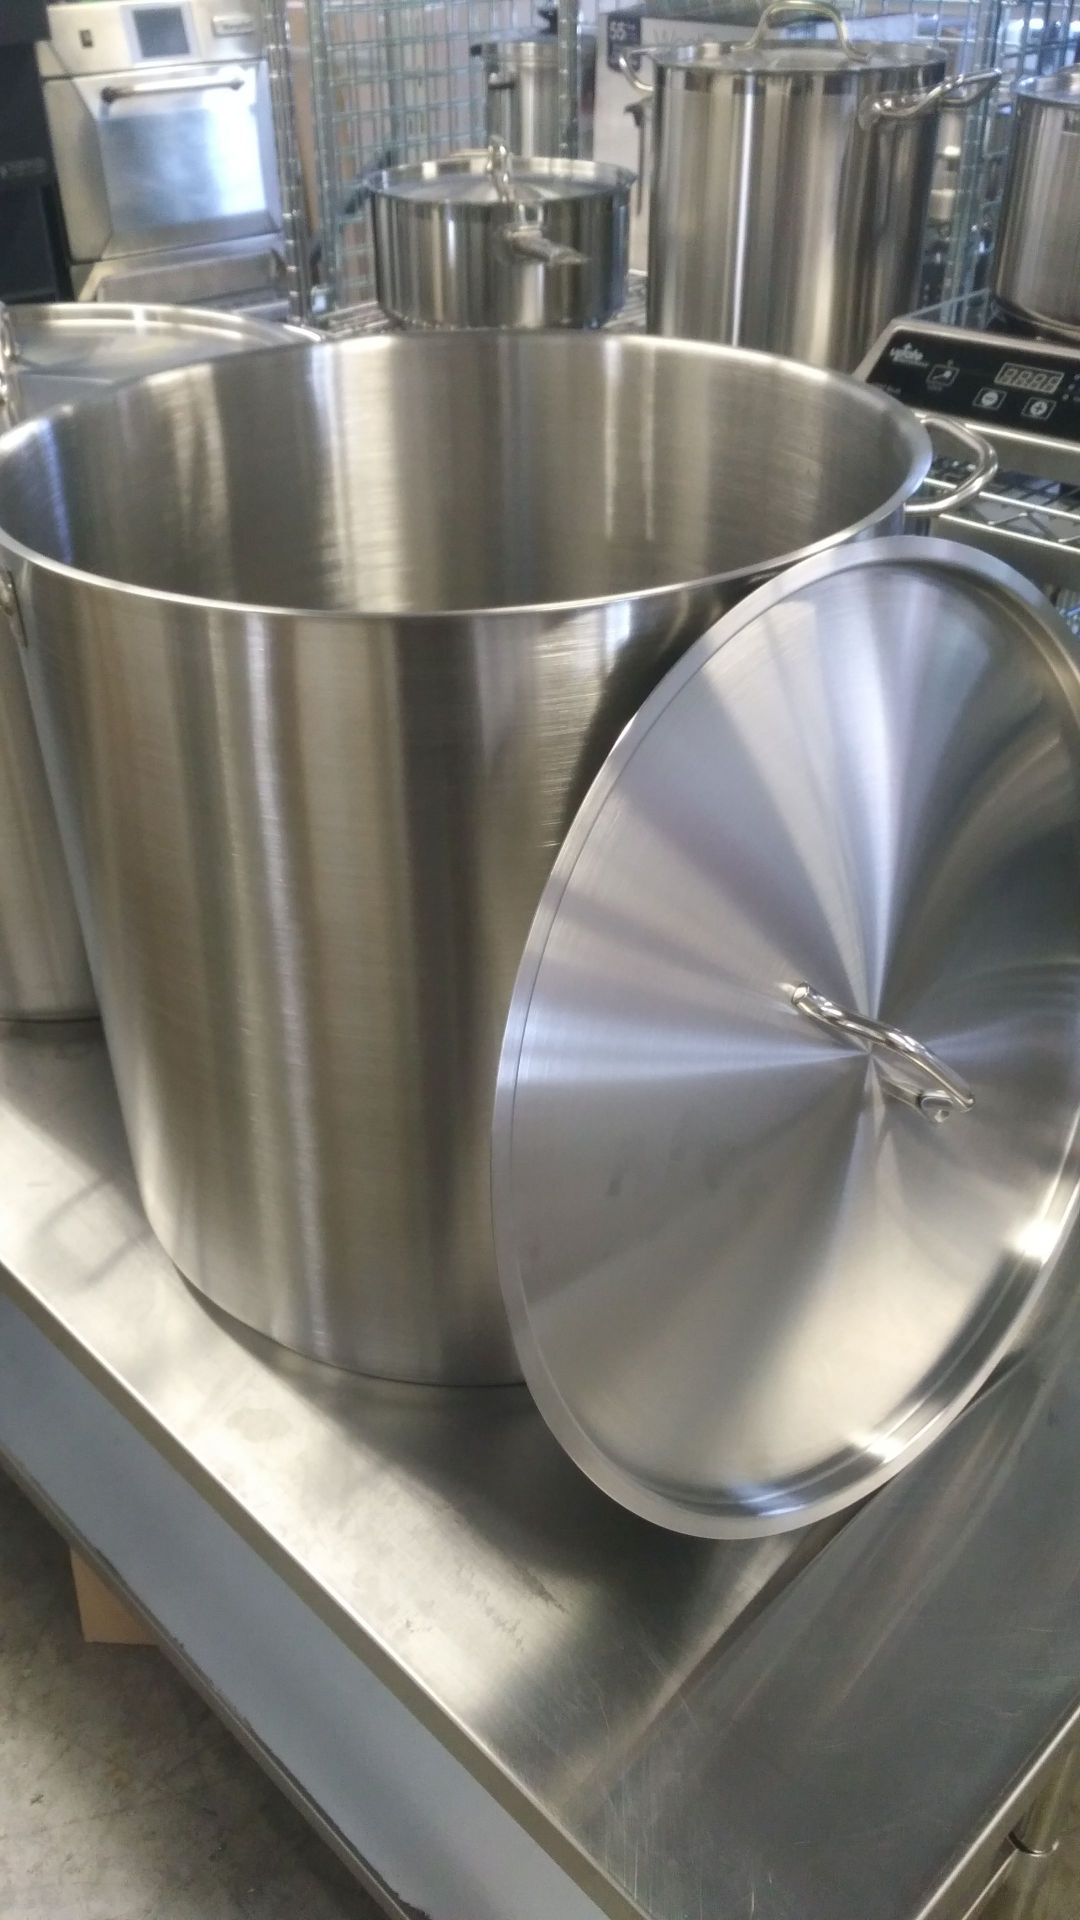 100qt Extra Heavy Duty Stainless Stock Pot Induction Capable - Image 3 of 3